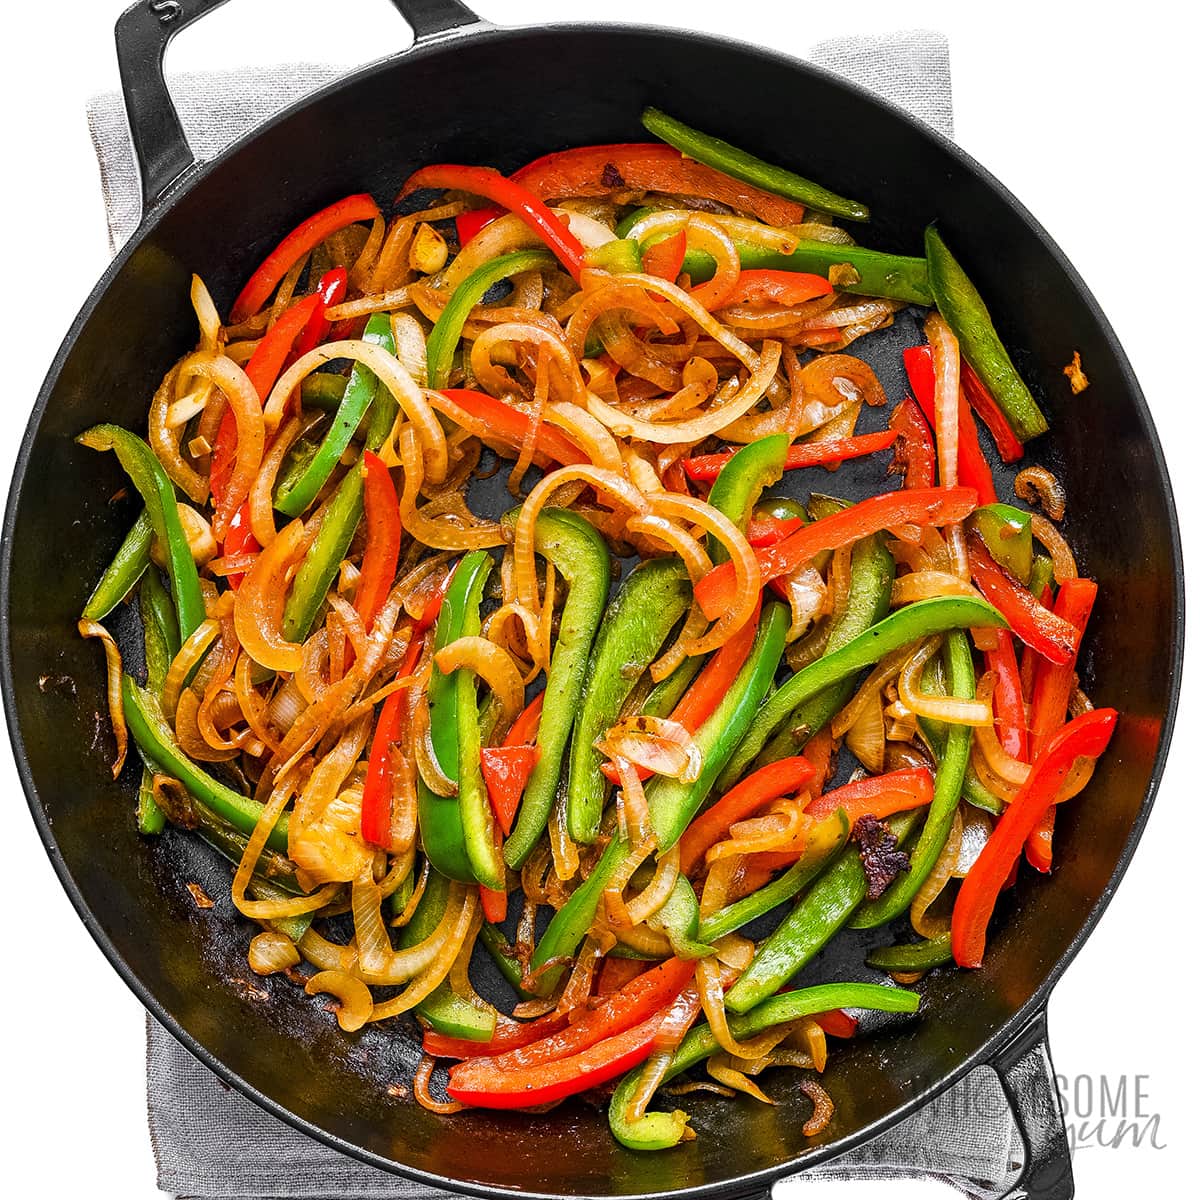 Bell peppers and onions in skillet.